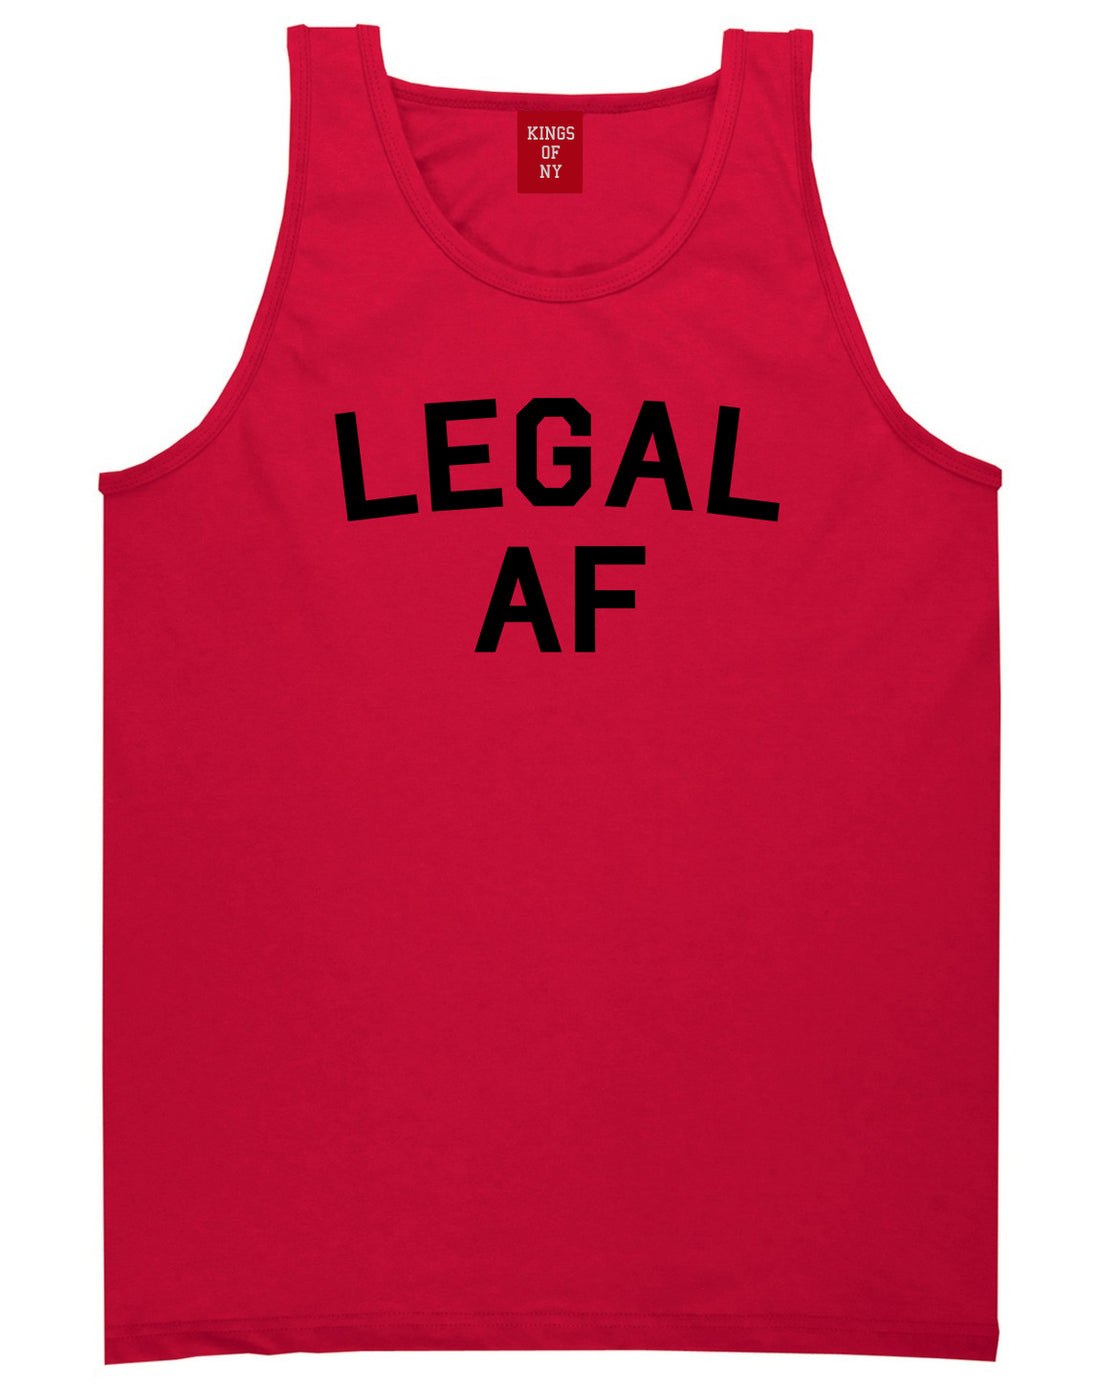 Legal AF 21st Birthday Mens Tank Top Shirt Red by Kings Of NY